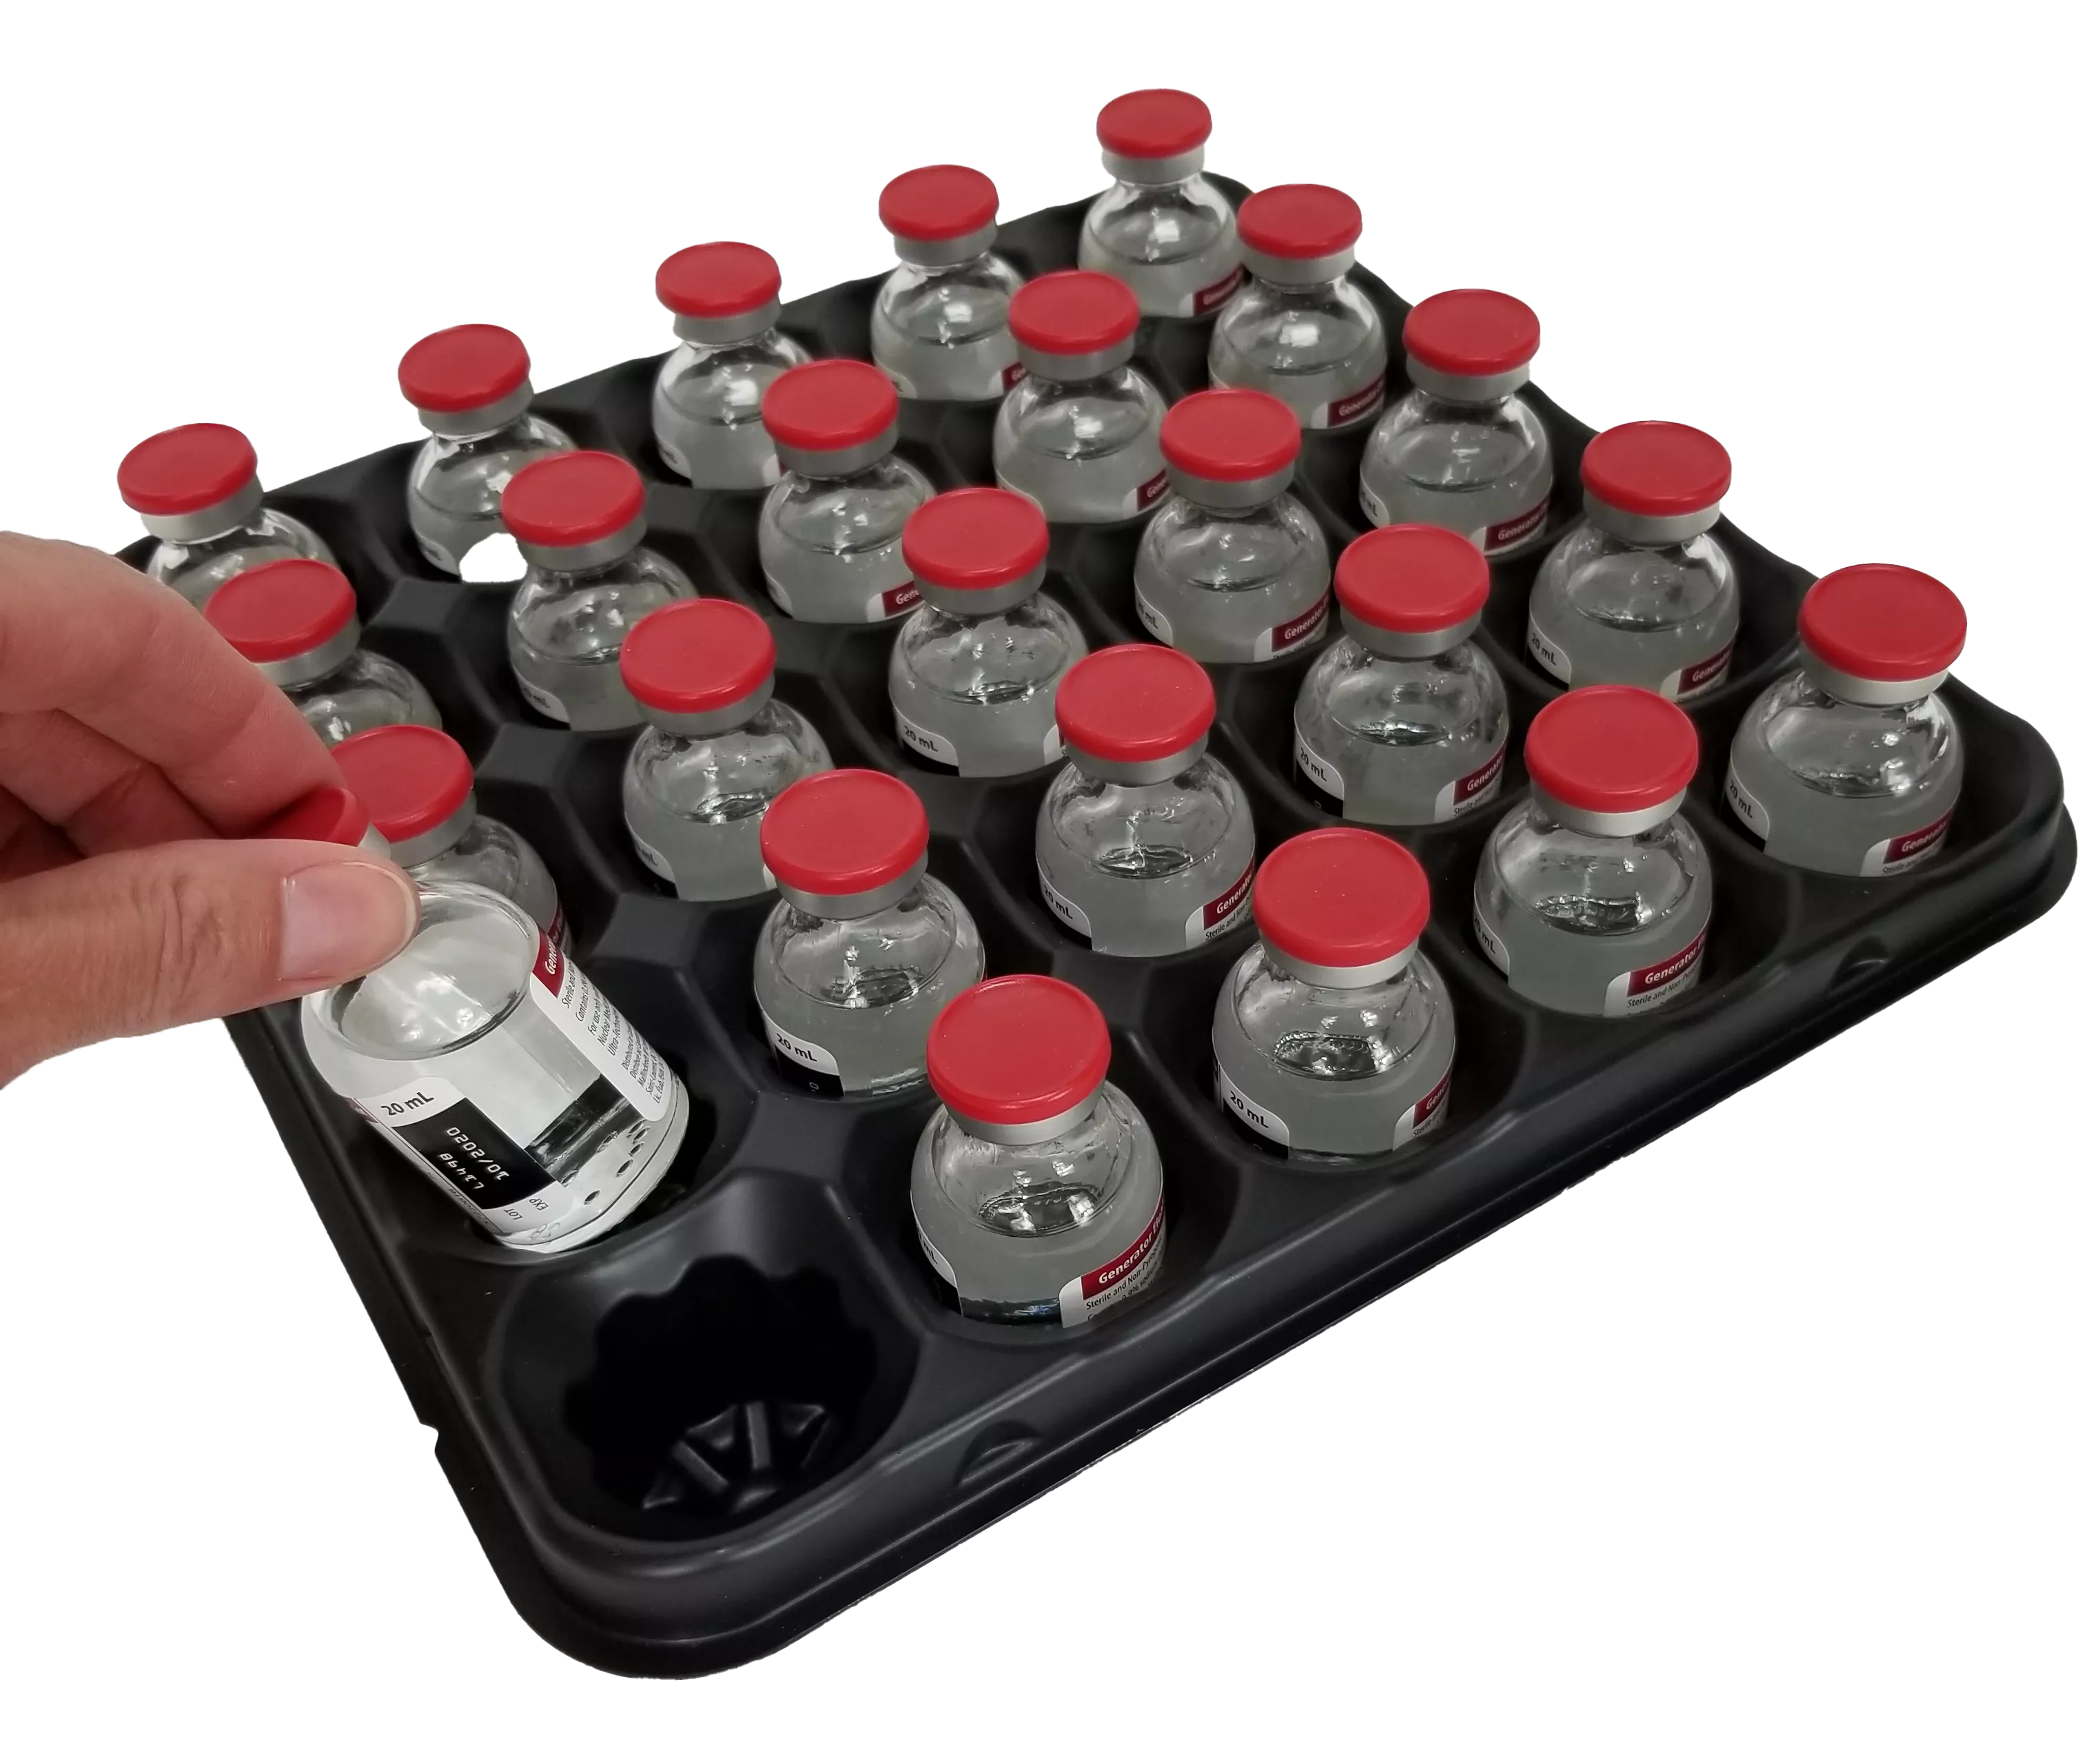 plastic trays formed around glass vials to protect them during transportation